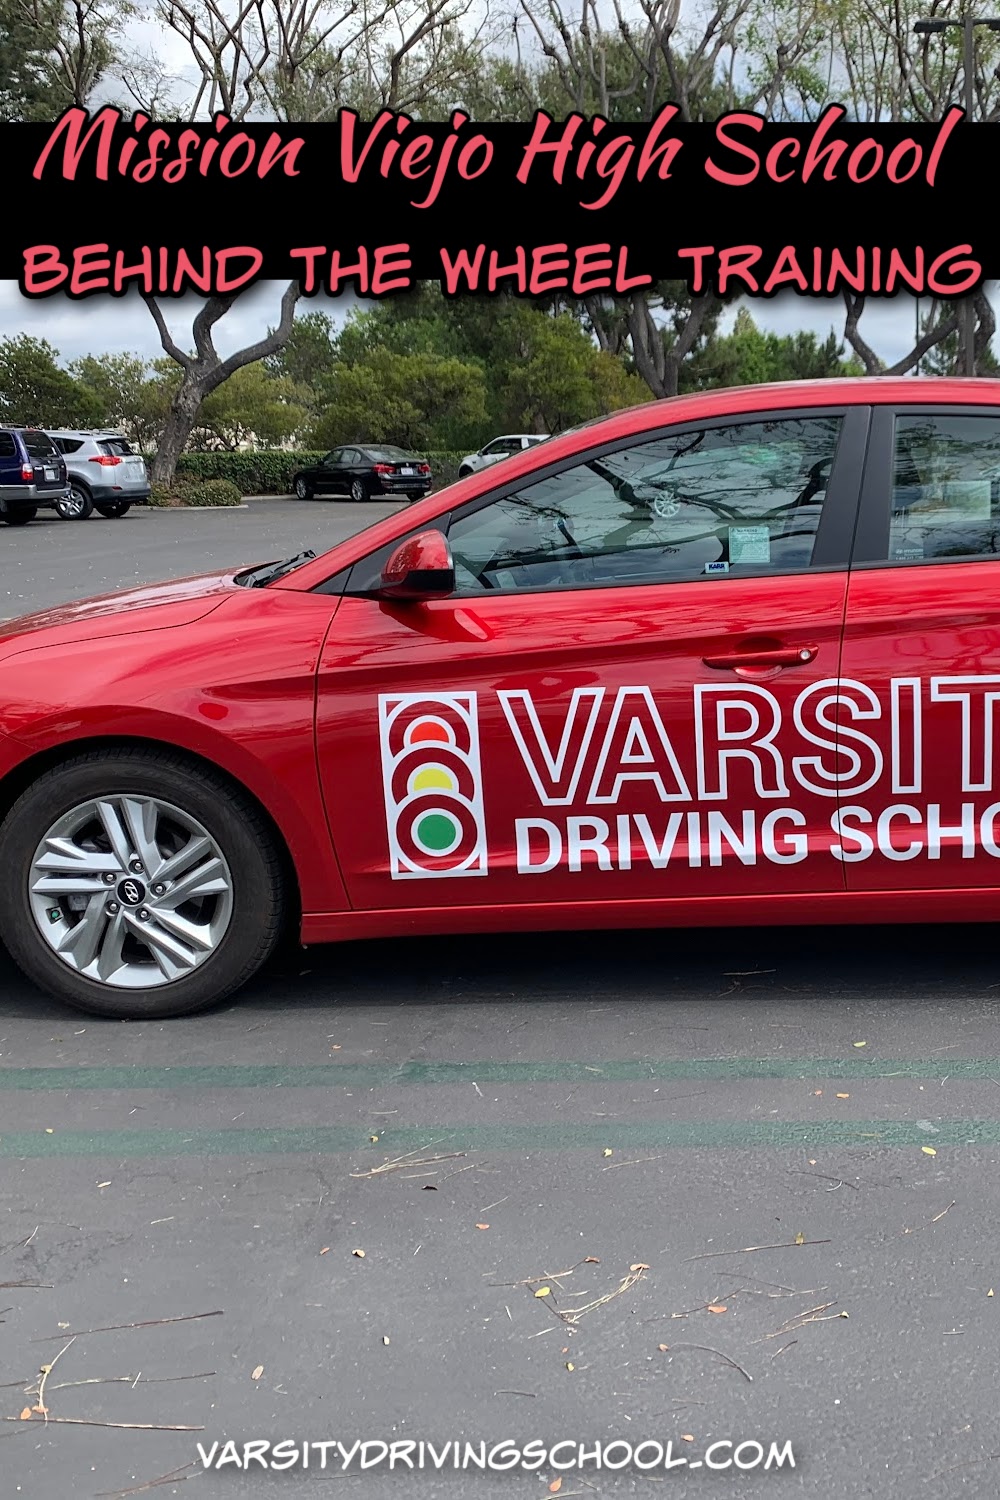 The best Mission Viejo High School behind the wheel training can be found at Varsity Driving School, the best driving school for teens.